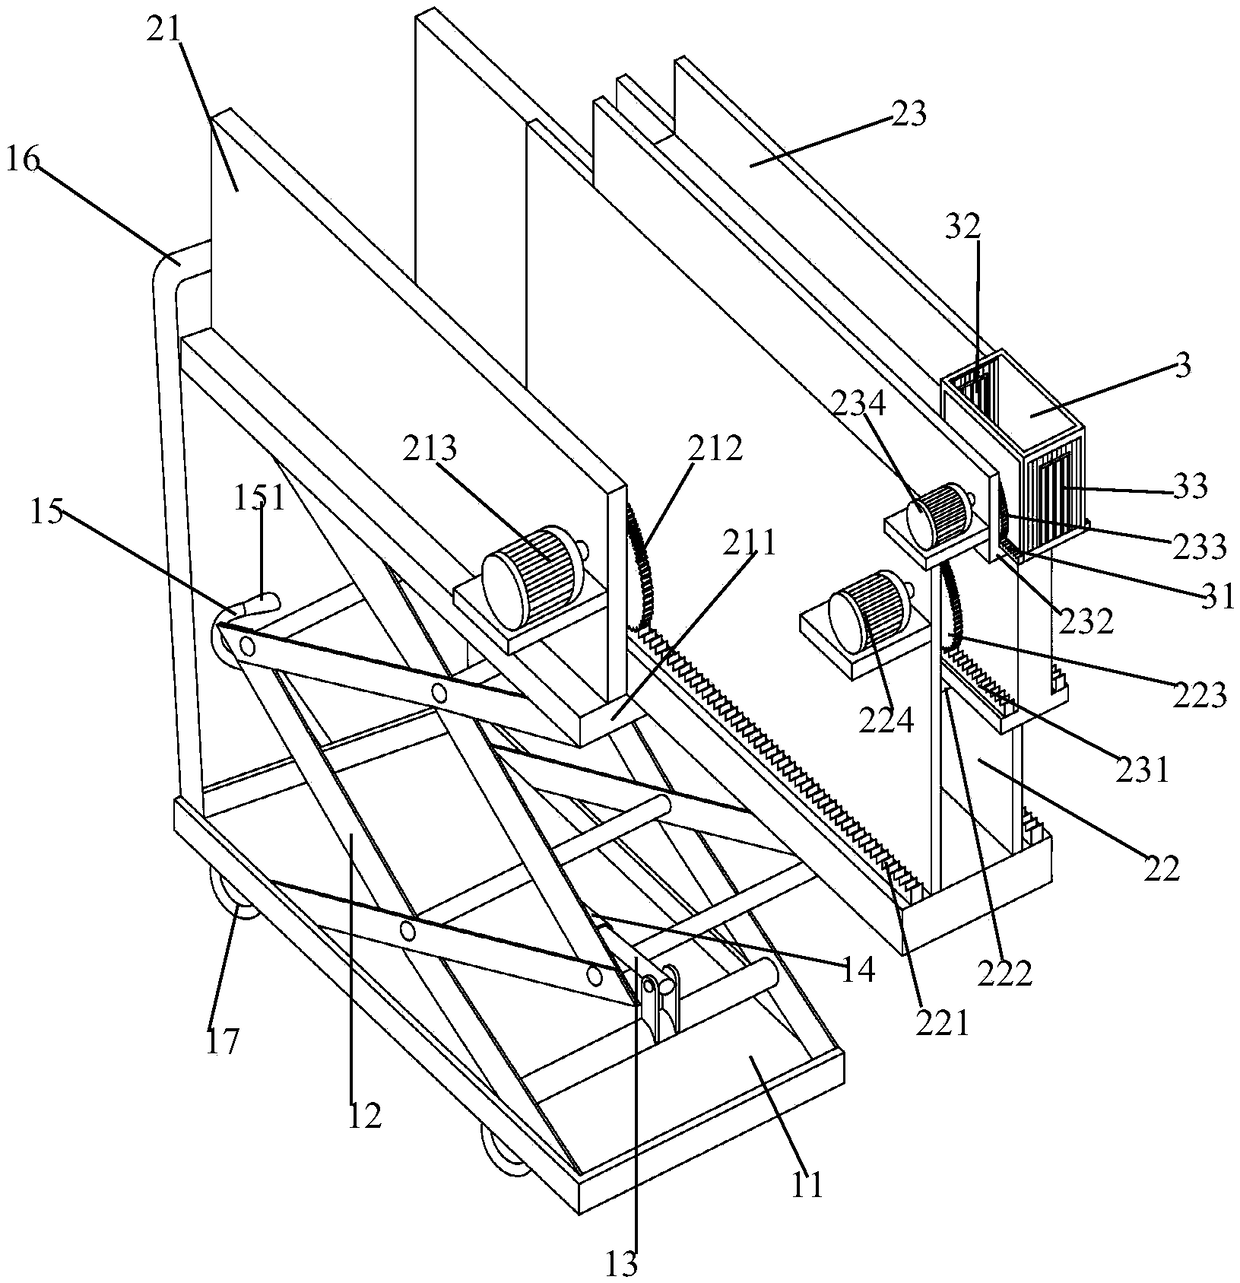 Pig cage device capable of vertical expansion and contraction as well as transverse expansion and contraction